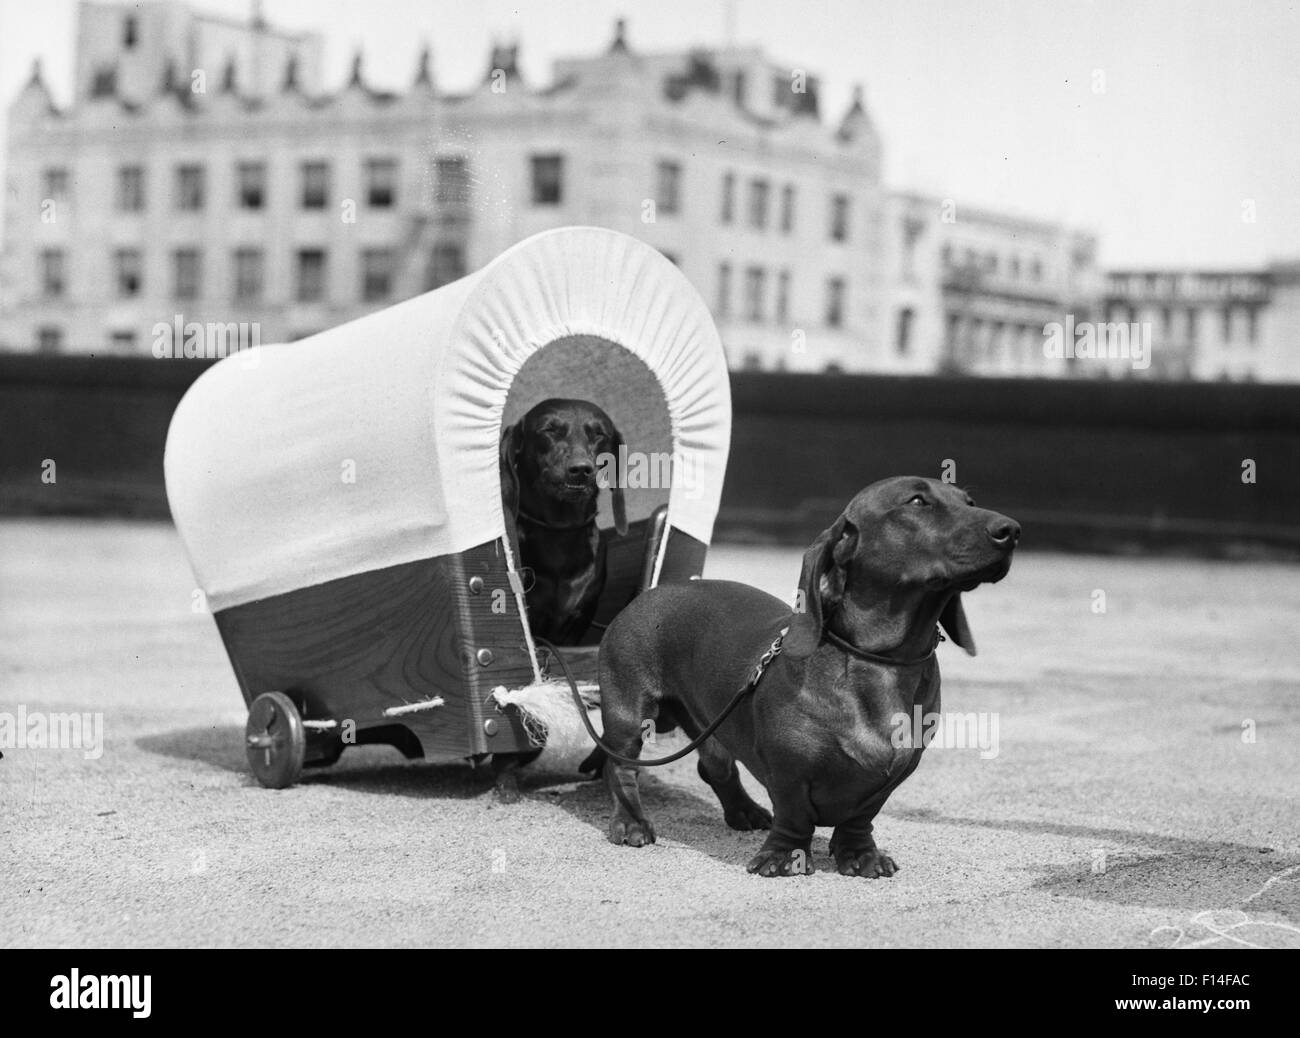 1930s TWO DACHSHUND DOGS ONE PULLING THE OTHER IN SMALL COVERED WAGON Stock Photo